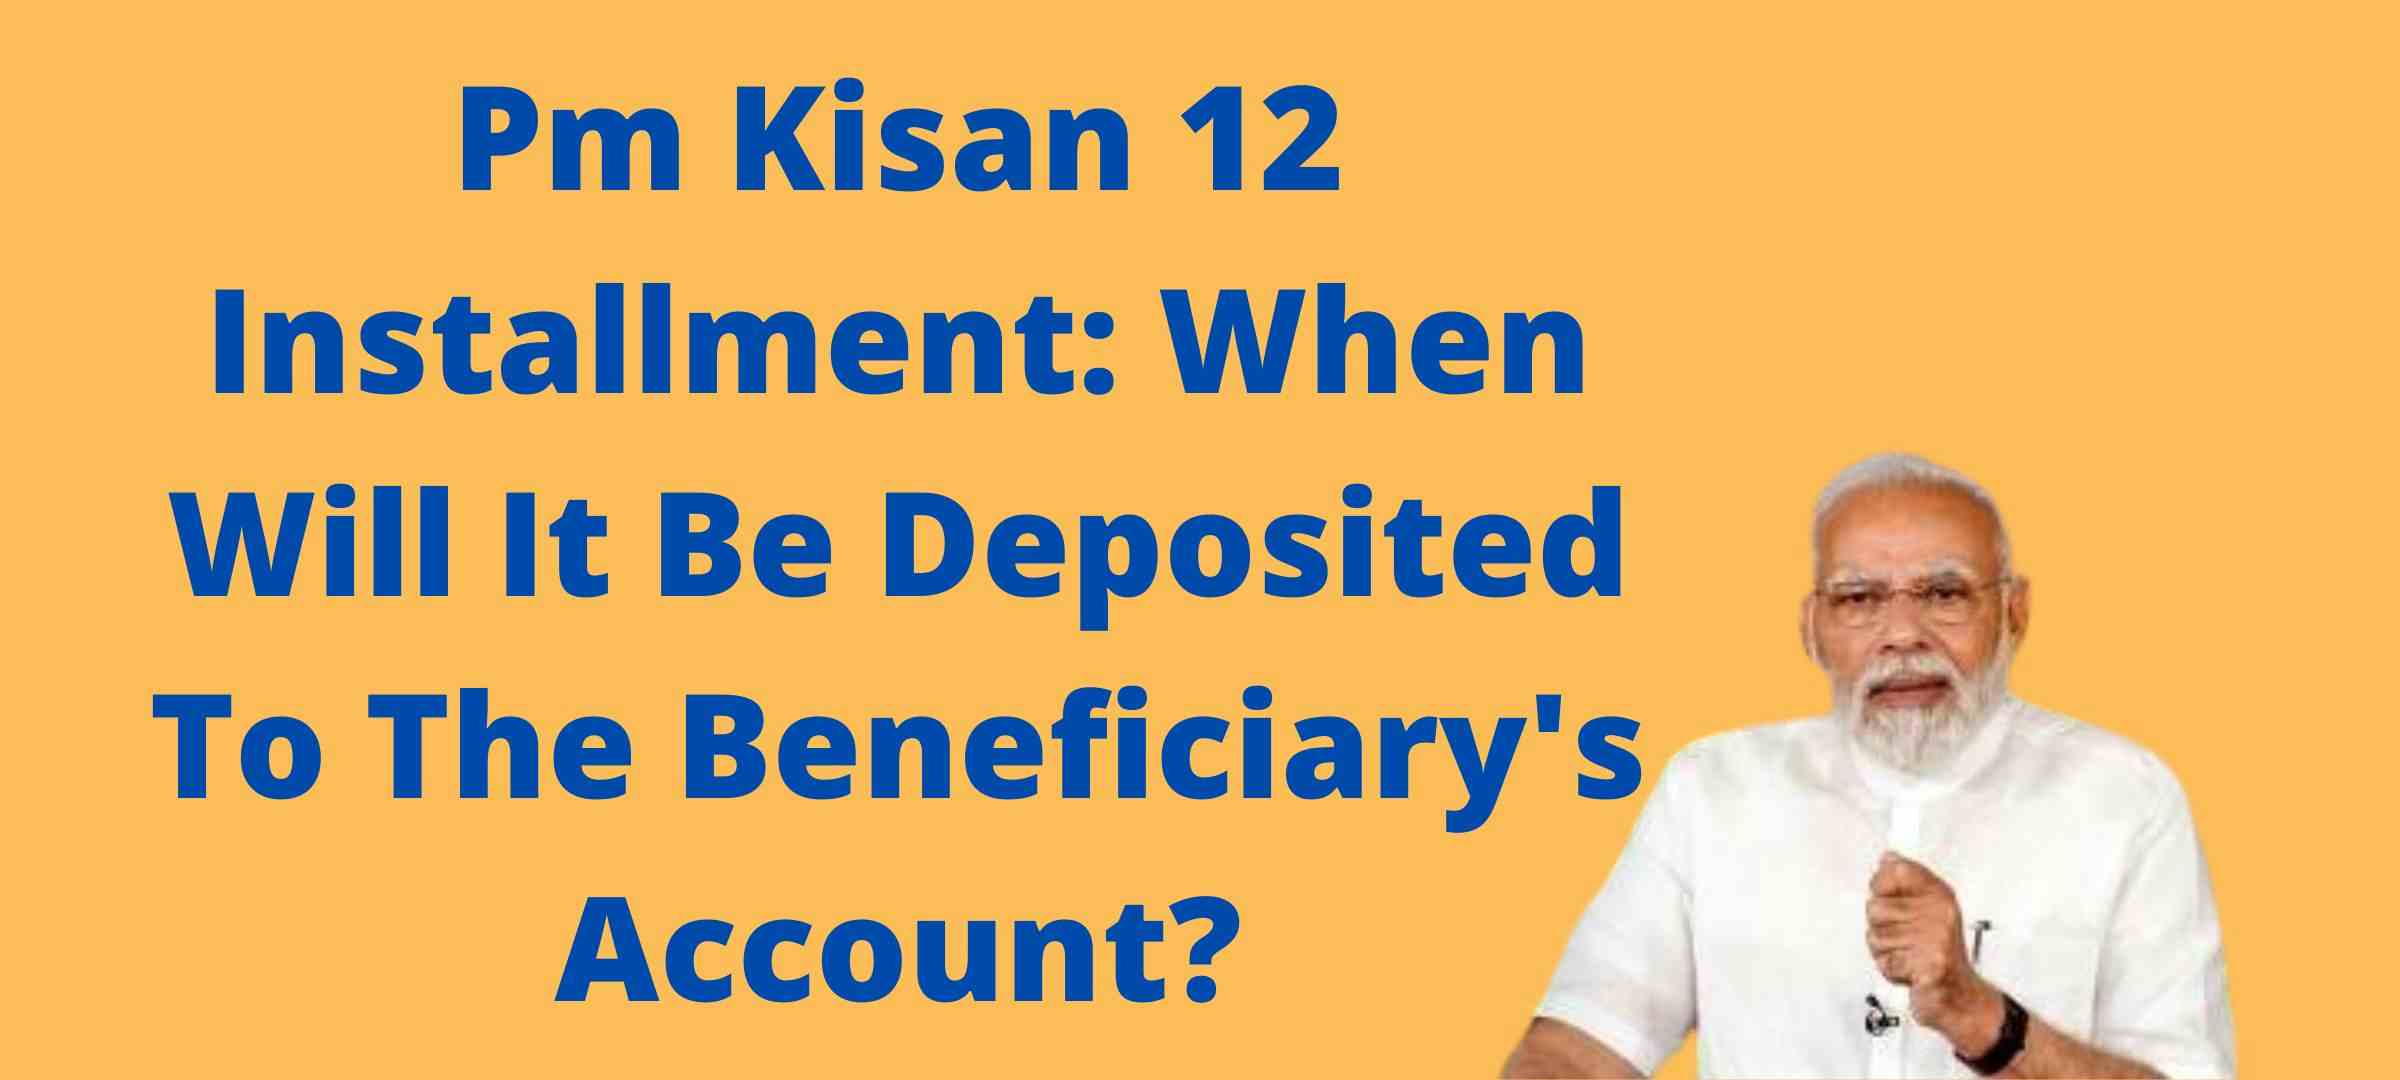 Pm Kisan 12 Installment: When Will It Be Deposited To The Beneficiary's Account?